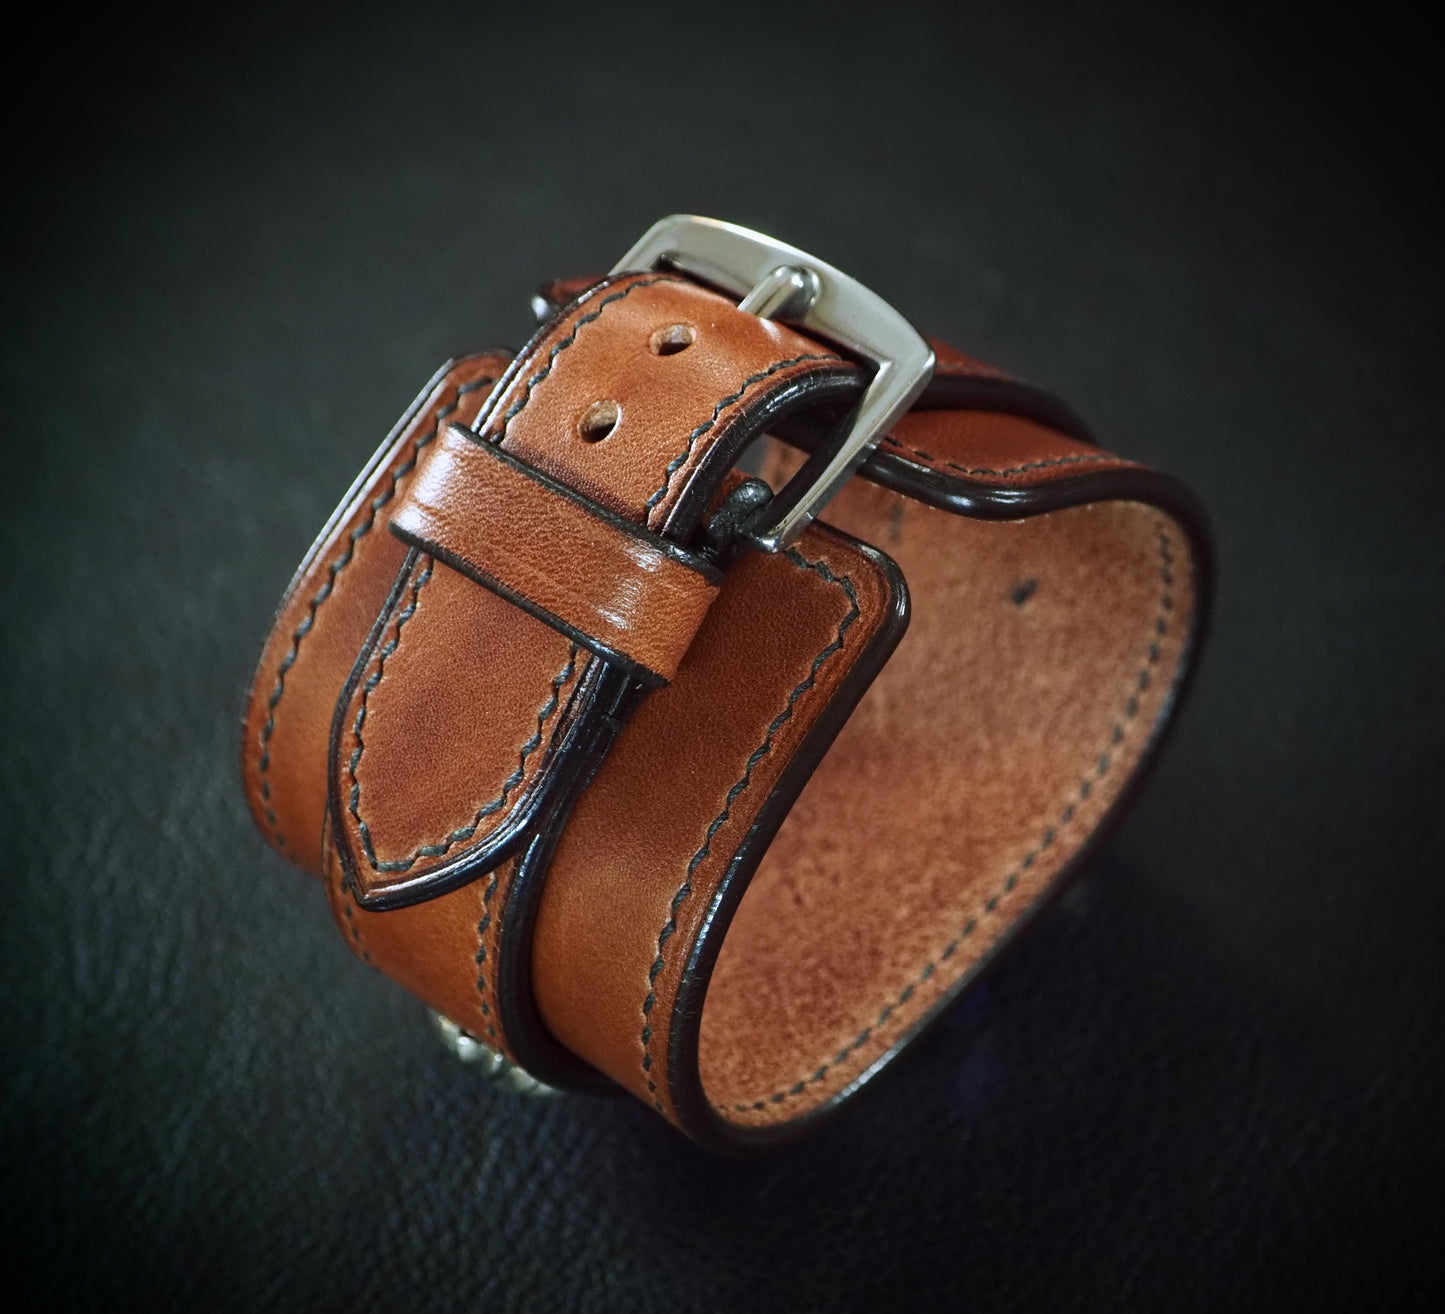 Rich  Tan leather Cuff Watch, Tuscan leather, vegetable tanned, Freddie Matara New York